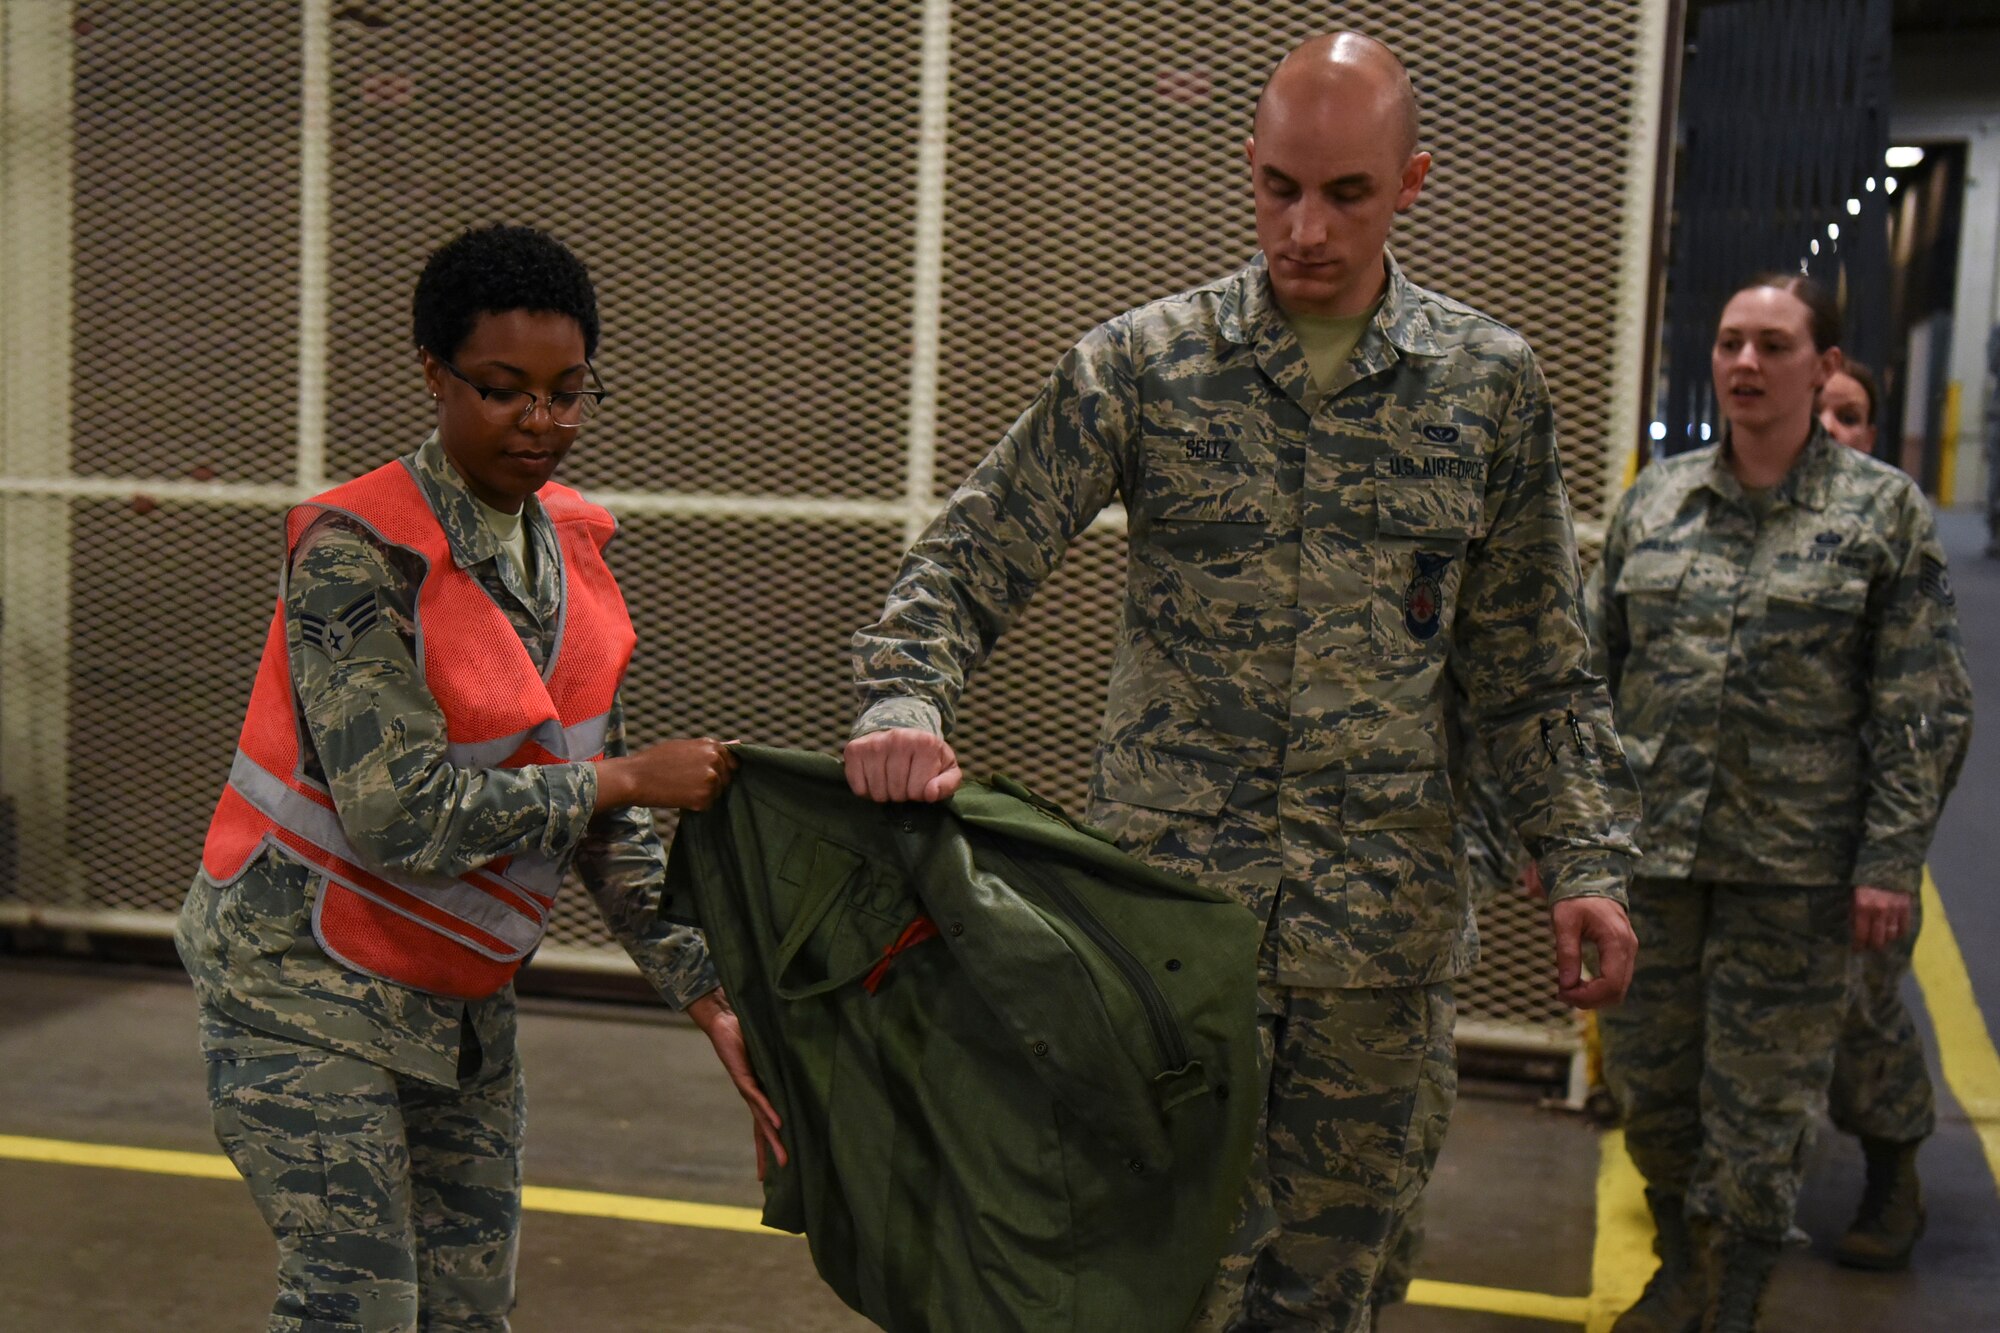 Senior Airman Shalice Chambers, a 319th Logistics Readiness Squadron equipment journeyman, assists in a readiness exercise June 14, 2018, on Grand Forks Air Force Base, North Dakota. Chambers ensured all Airmen had the proper deployment bad for the exercise. (U.S. Air Force photo by Airman 1st Class Melody K. Wolff)